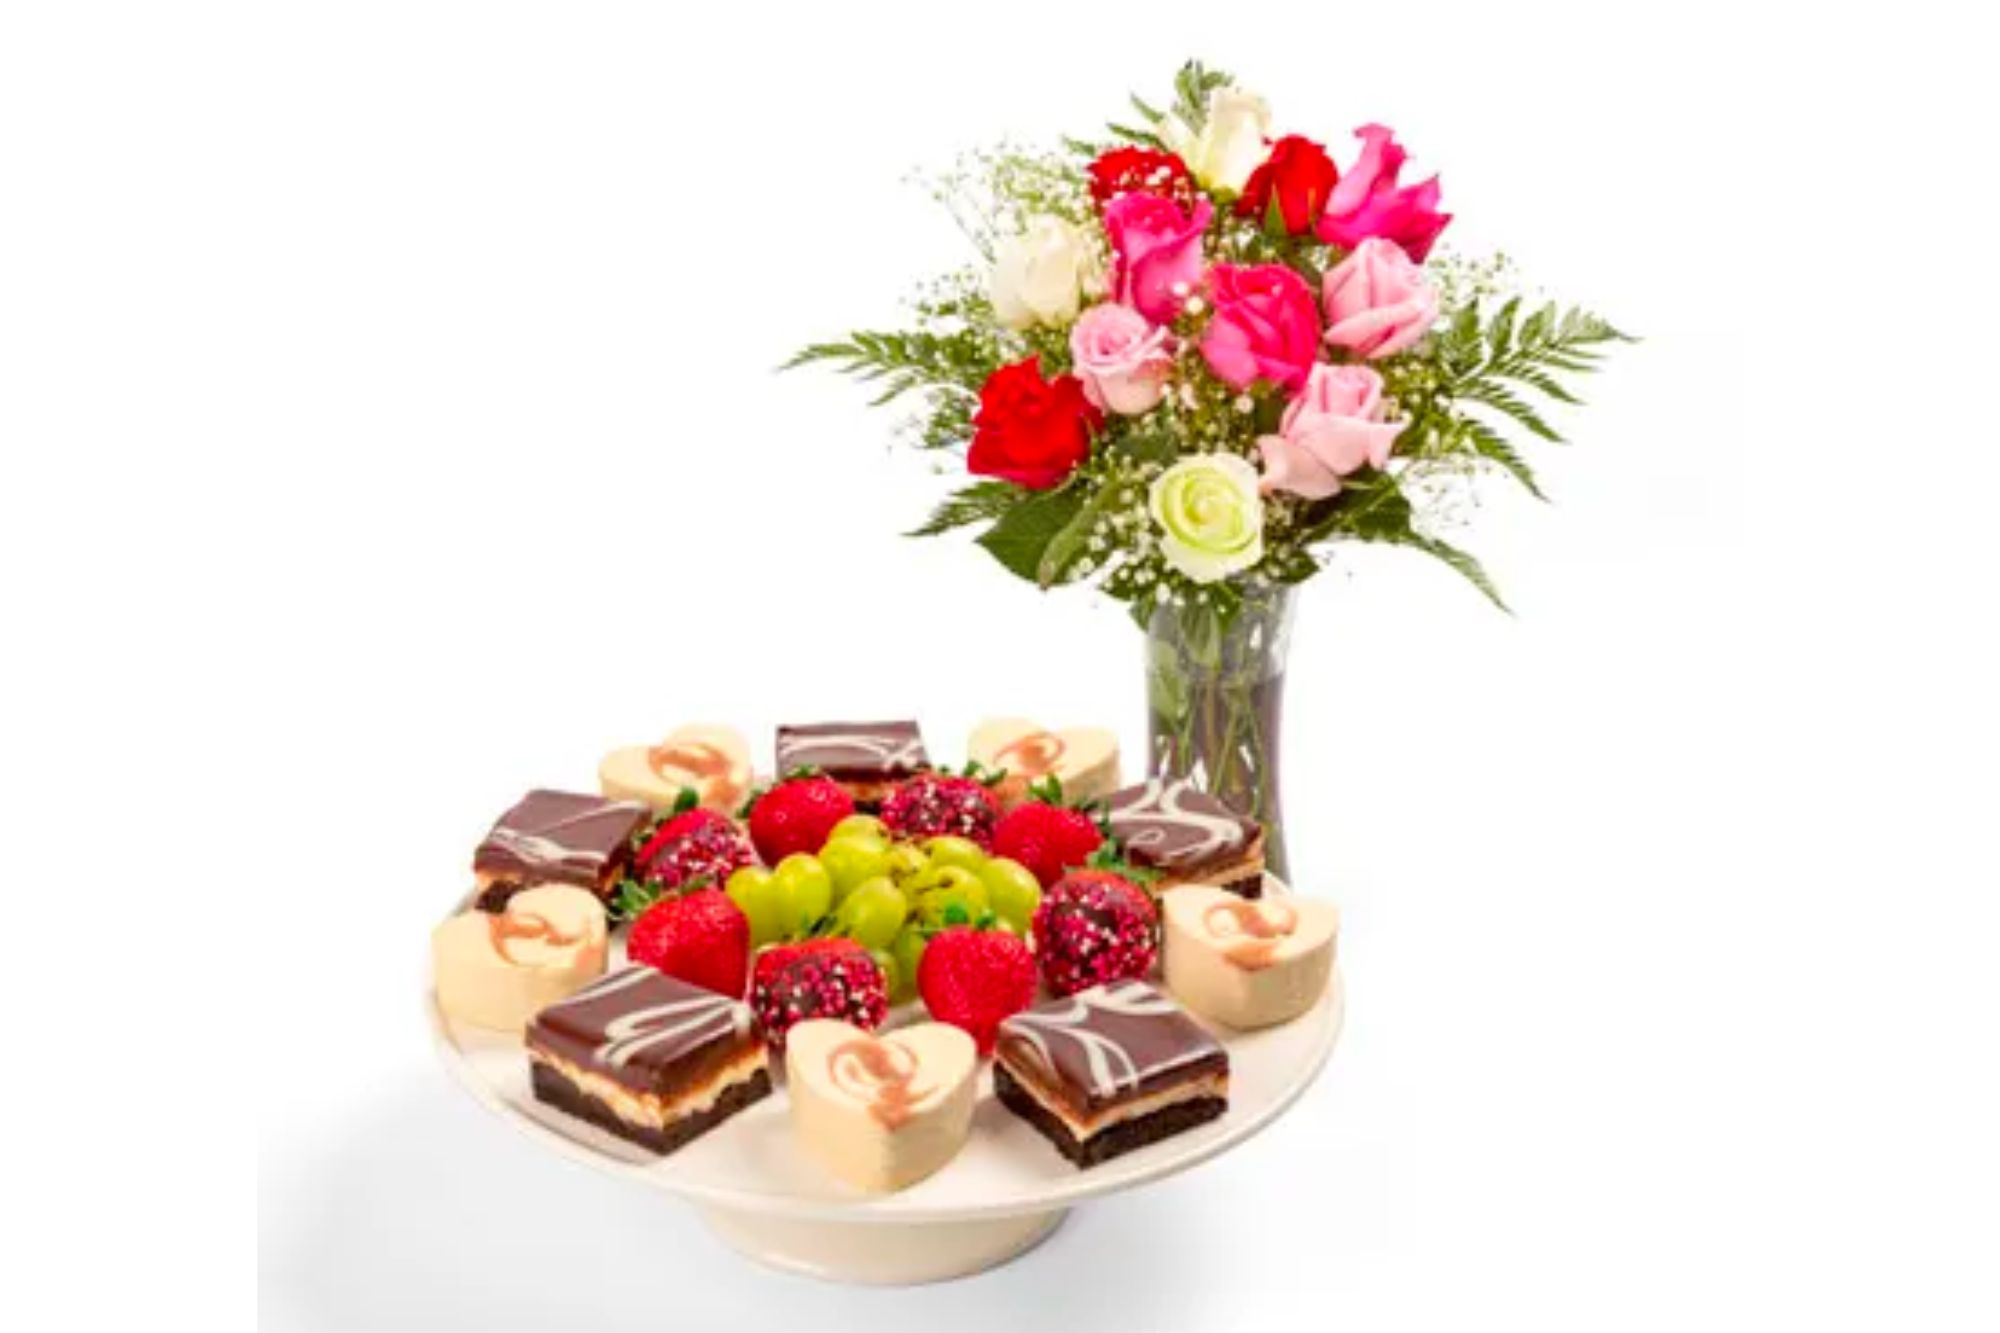 A dessert platter and roses in a vase.